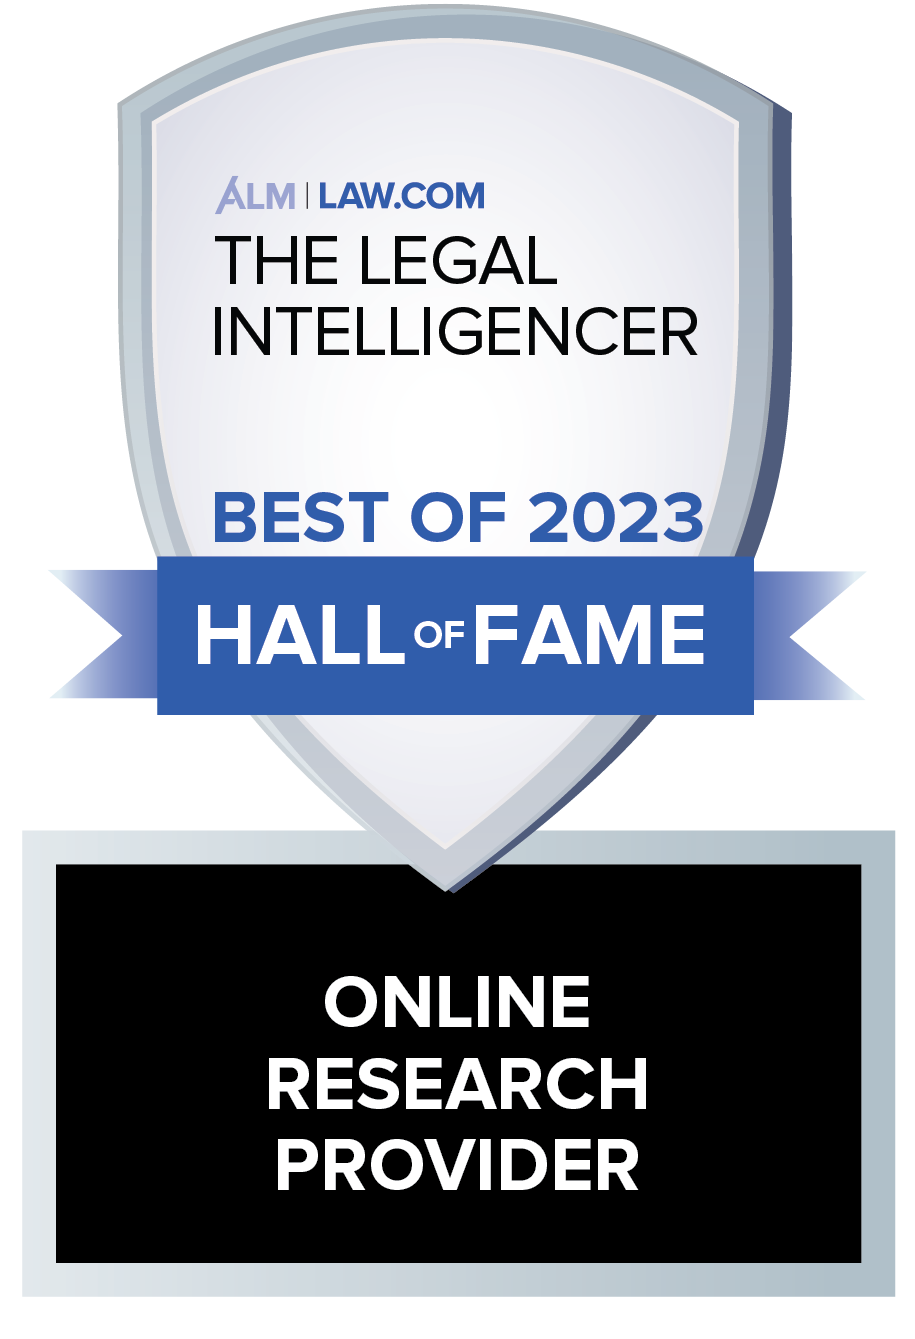 The Legal Intelligencer Best of 2023: WINNER - Best Legal Research Service